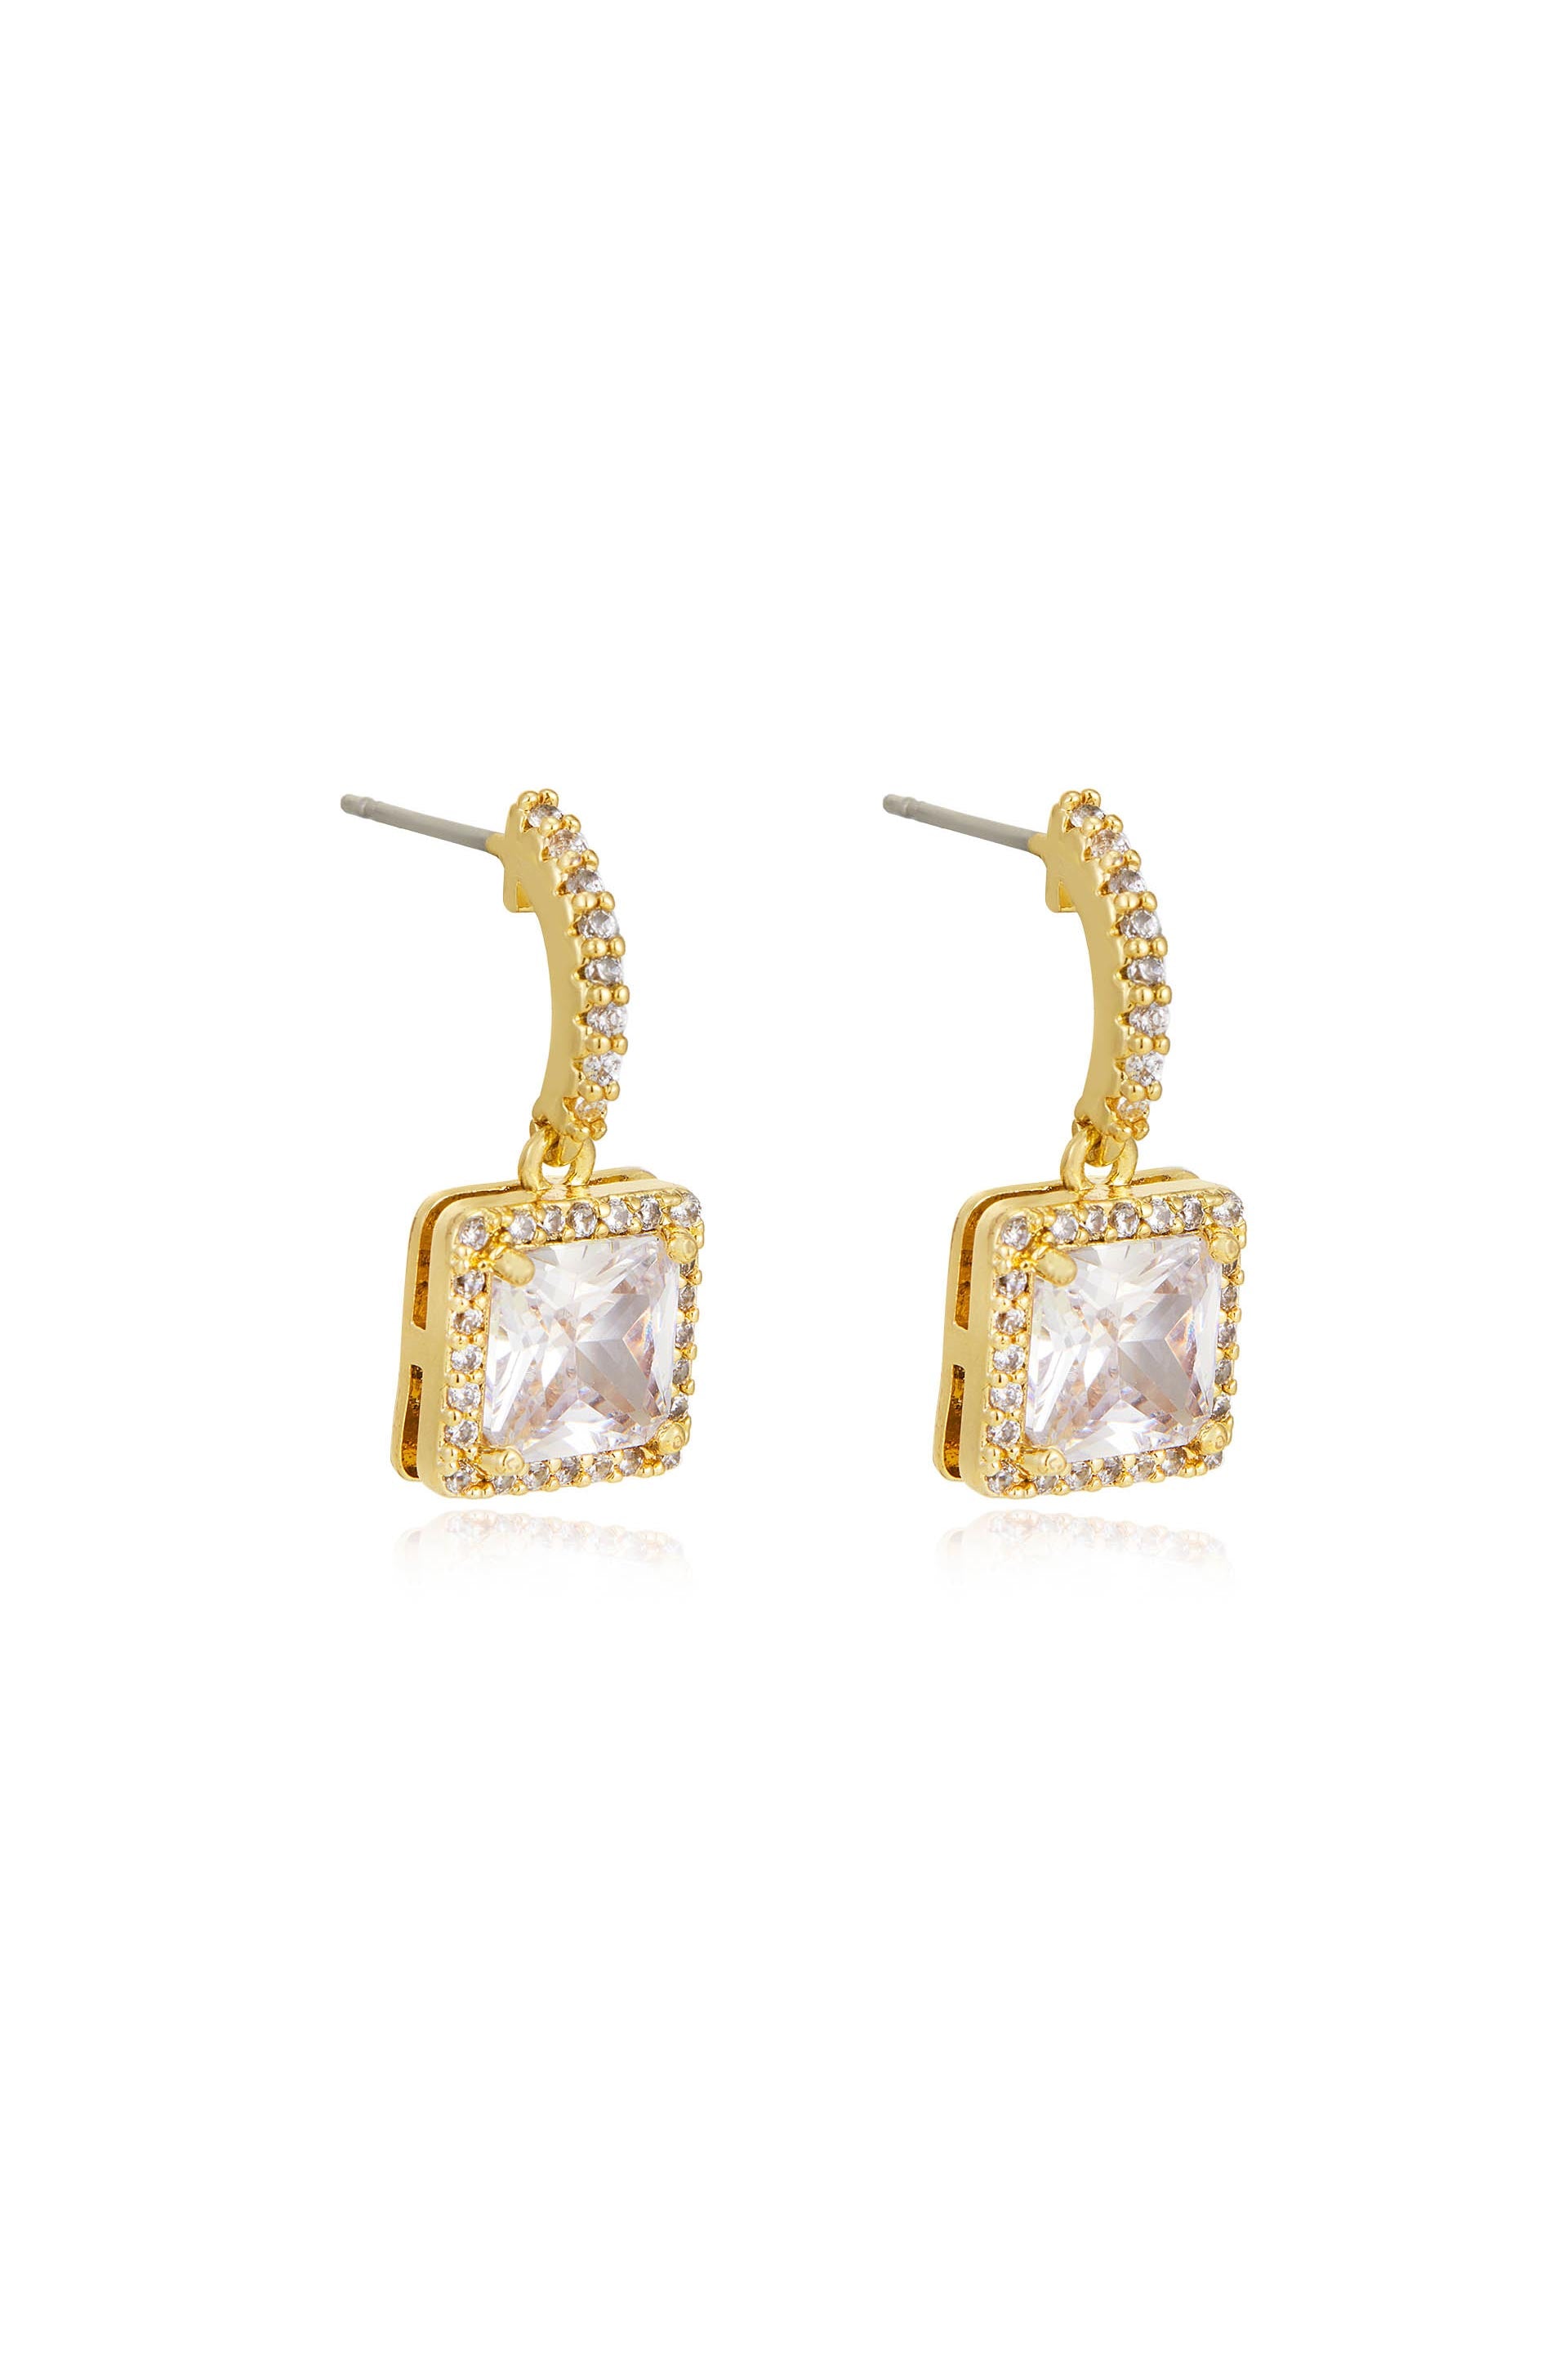 Jewelivery - GET ONE SIDE #EARRINGS OR 2 SIDES ‼️#DIAMONDS #18KTGOLD  🌏WORLDWIDE SHIPPING 🌏 #SHOPONLINE #JEWELIVERY #DUBAI WWW.JEWELIVERY.COM  https://www.jewelivery.com/products/diamond-18kt-gold-earrings-de1y111?_pos=1&_sid=d52232385&_ss=r  ...